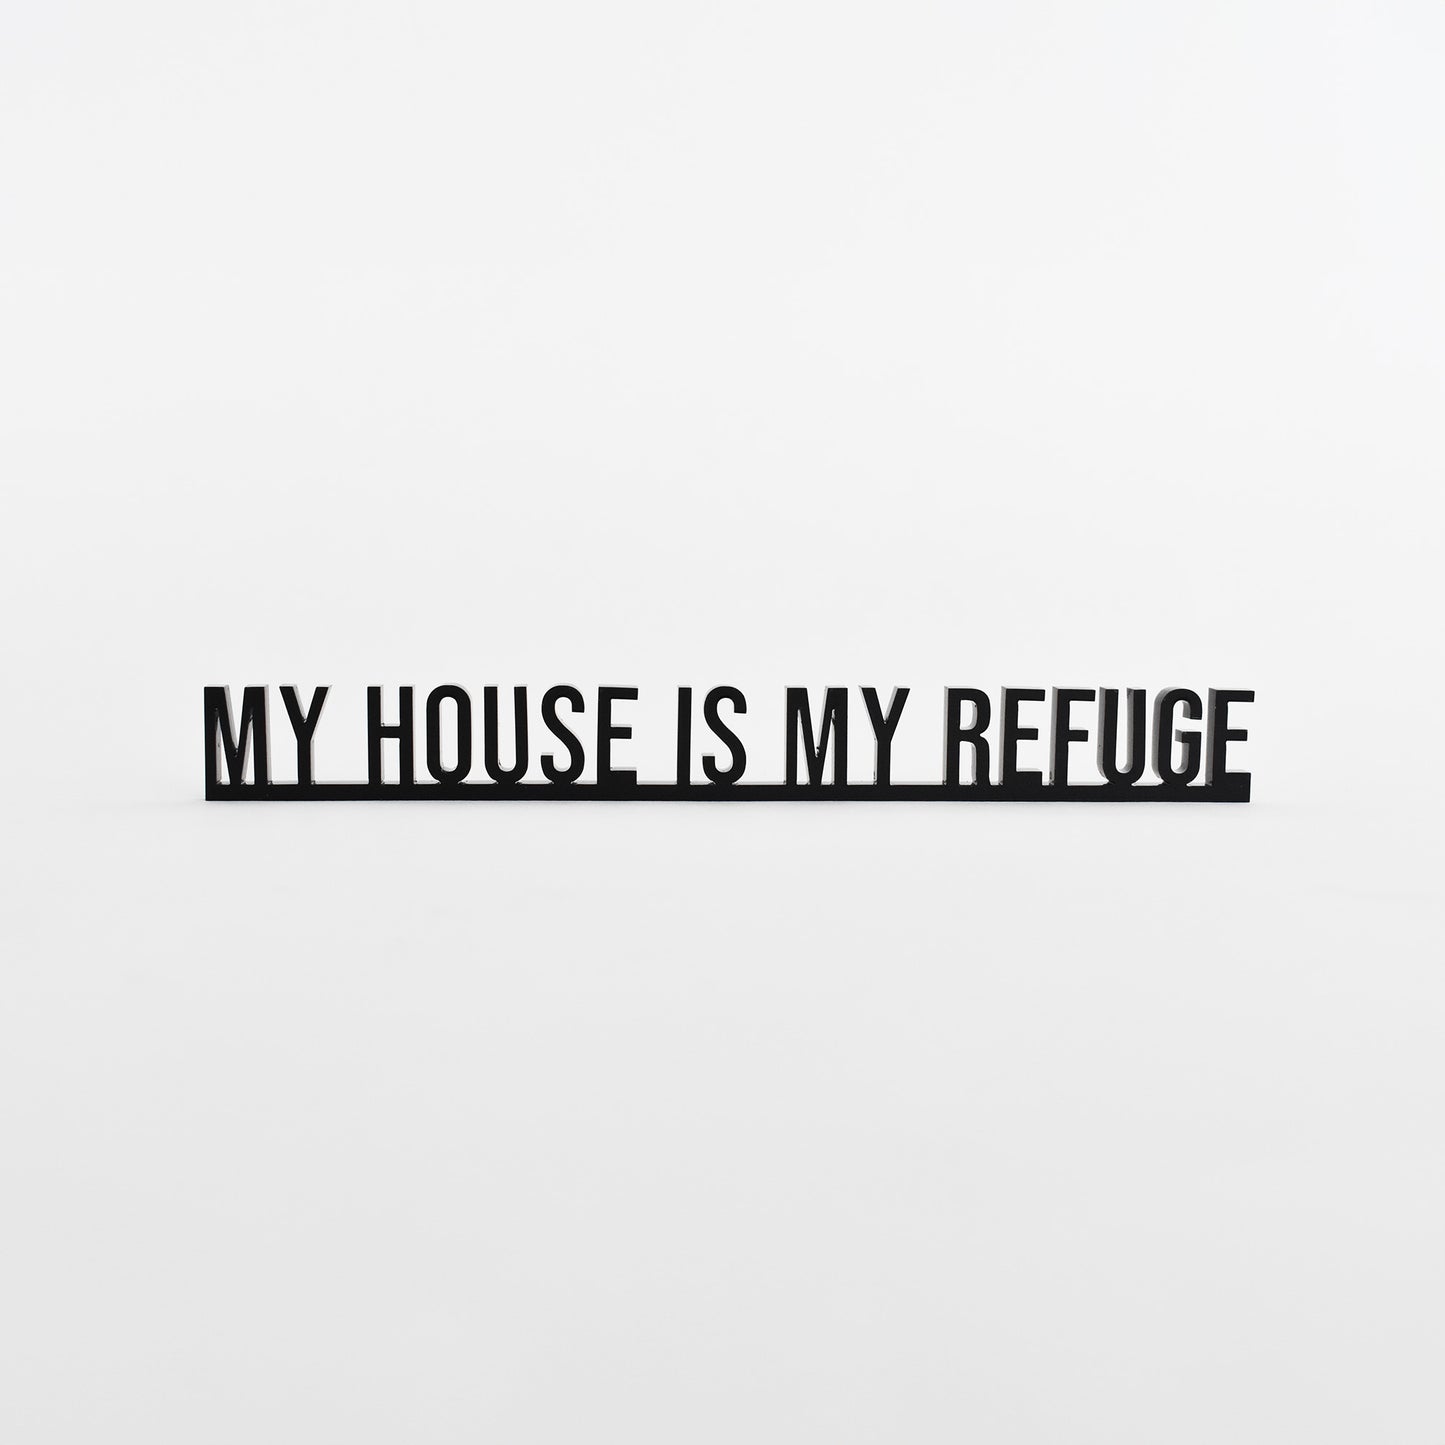 Architecture Quotes - My House is my Refuge  beamalevich architecture gift design gift art gift